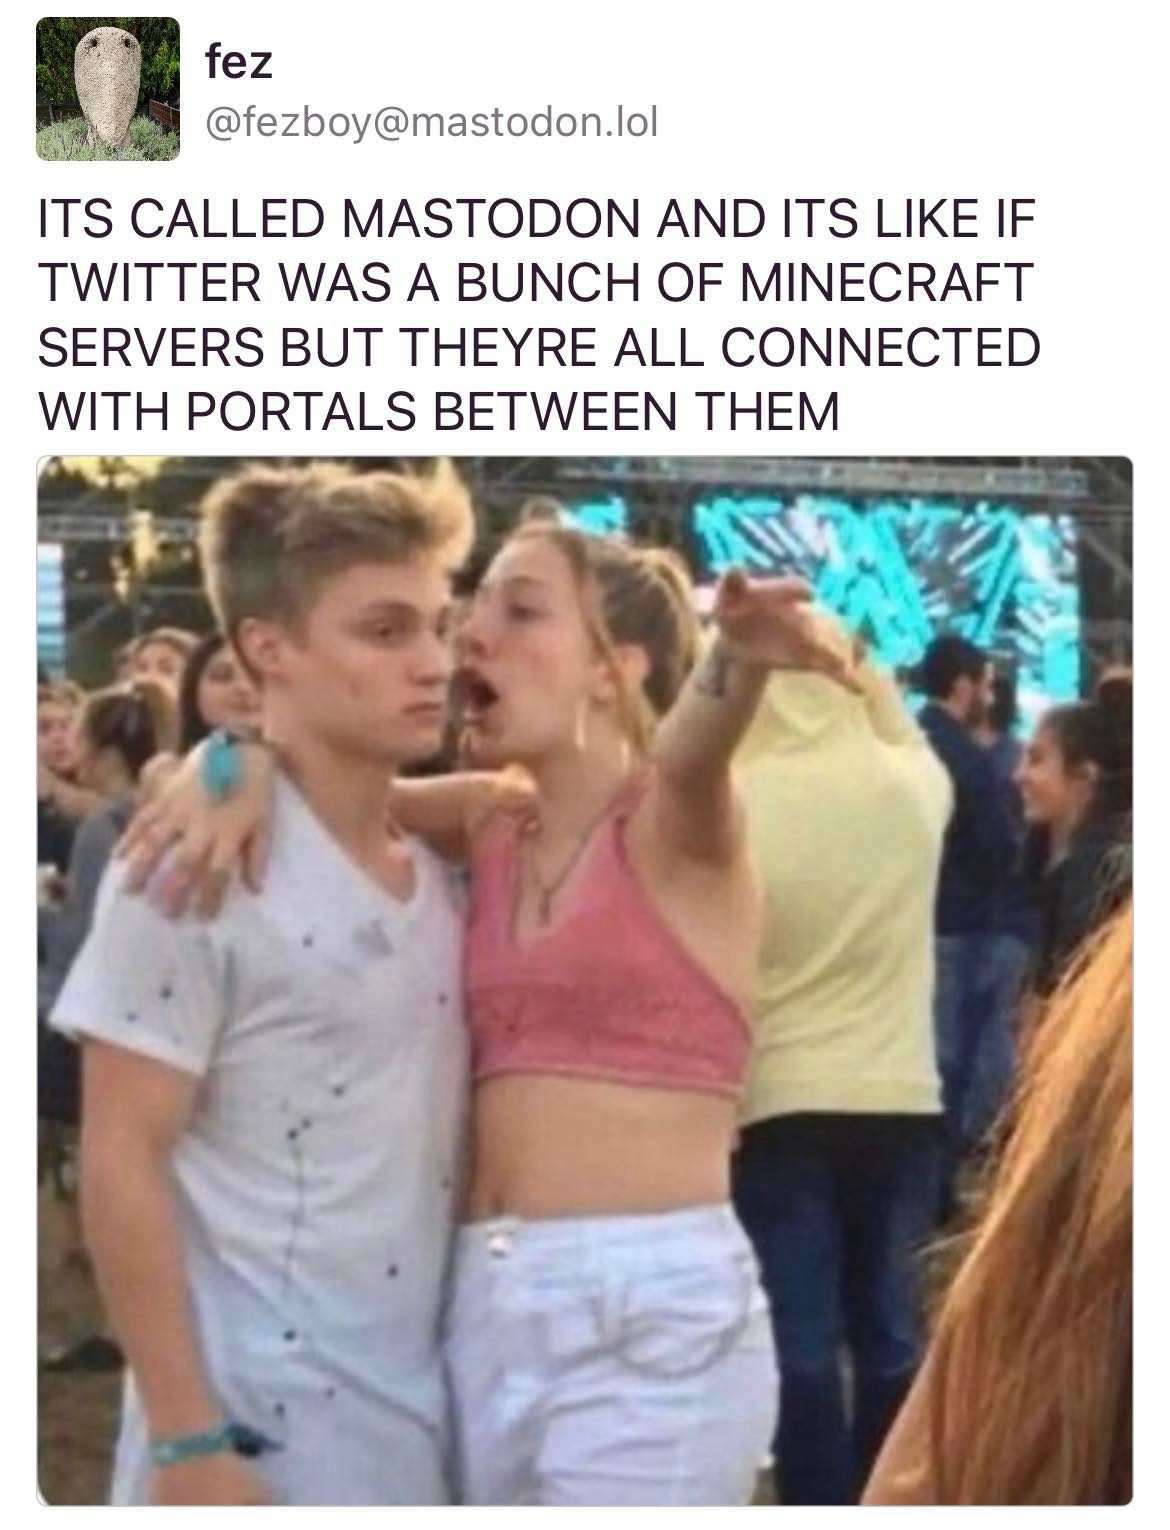 The girl explaining something to a guy meme with text: ITS CALLED MASTODON AND ITS LIKE IF TWITTER WAS A BUNCH OF MINECRAFT SERVERS BUT THEYRE ALL CONNECTED WITH PORTALS BETWEEN THEM